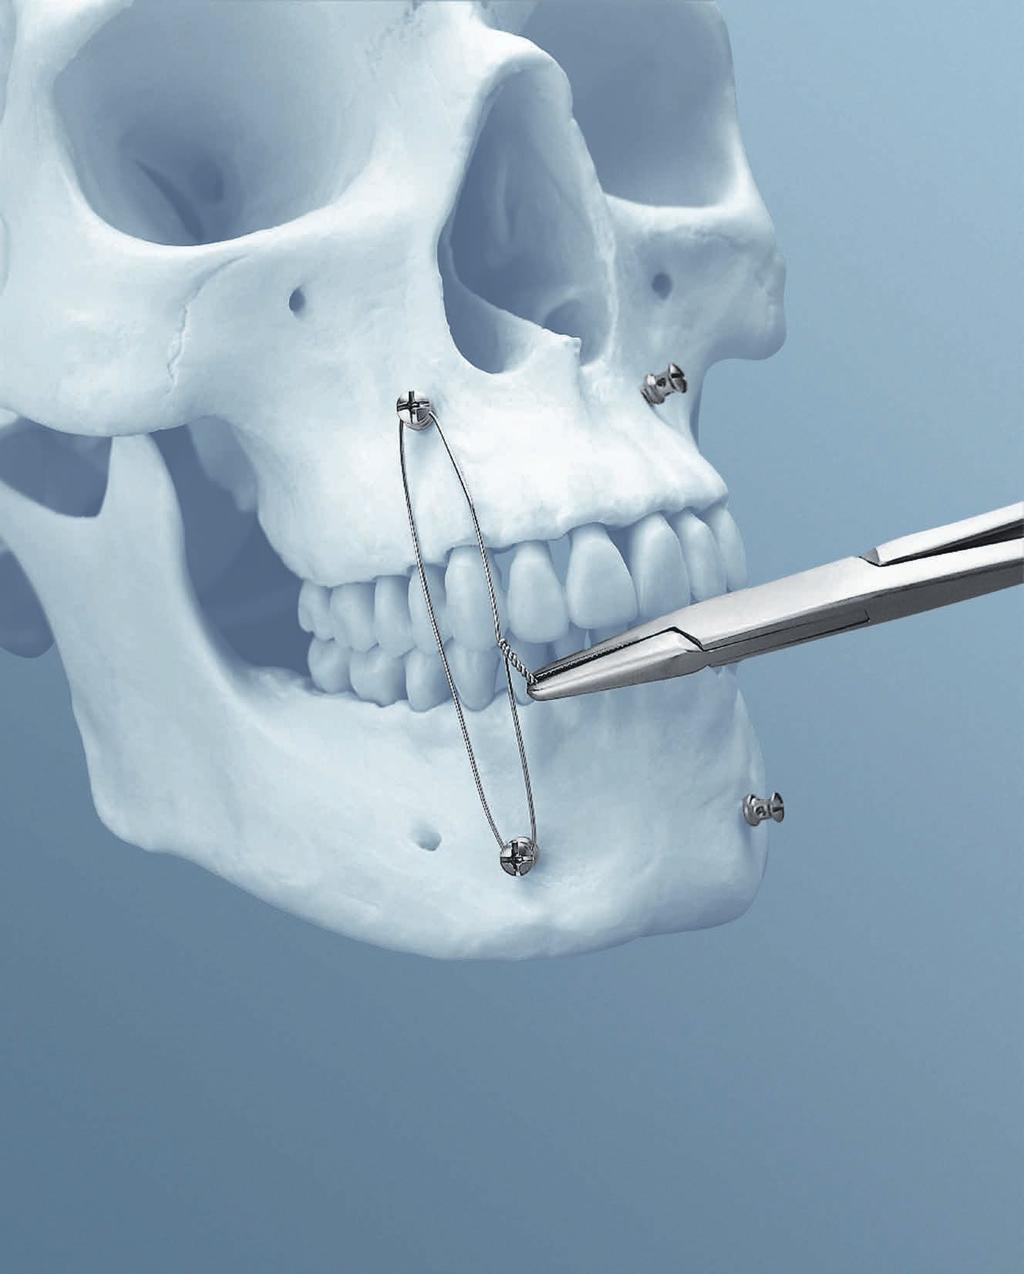 IMF Screw Set. For temporary, peri opera tive stabilisation of the occlusion in adults.